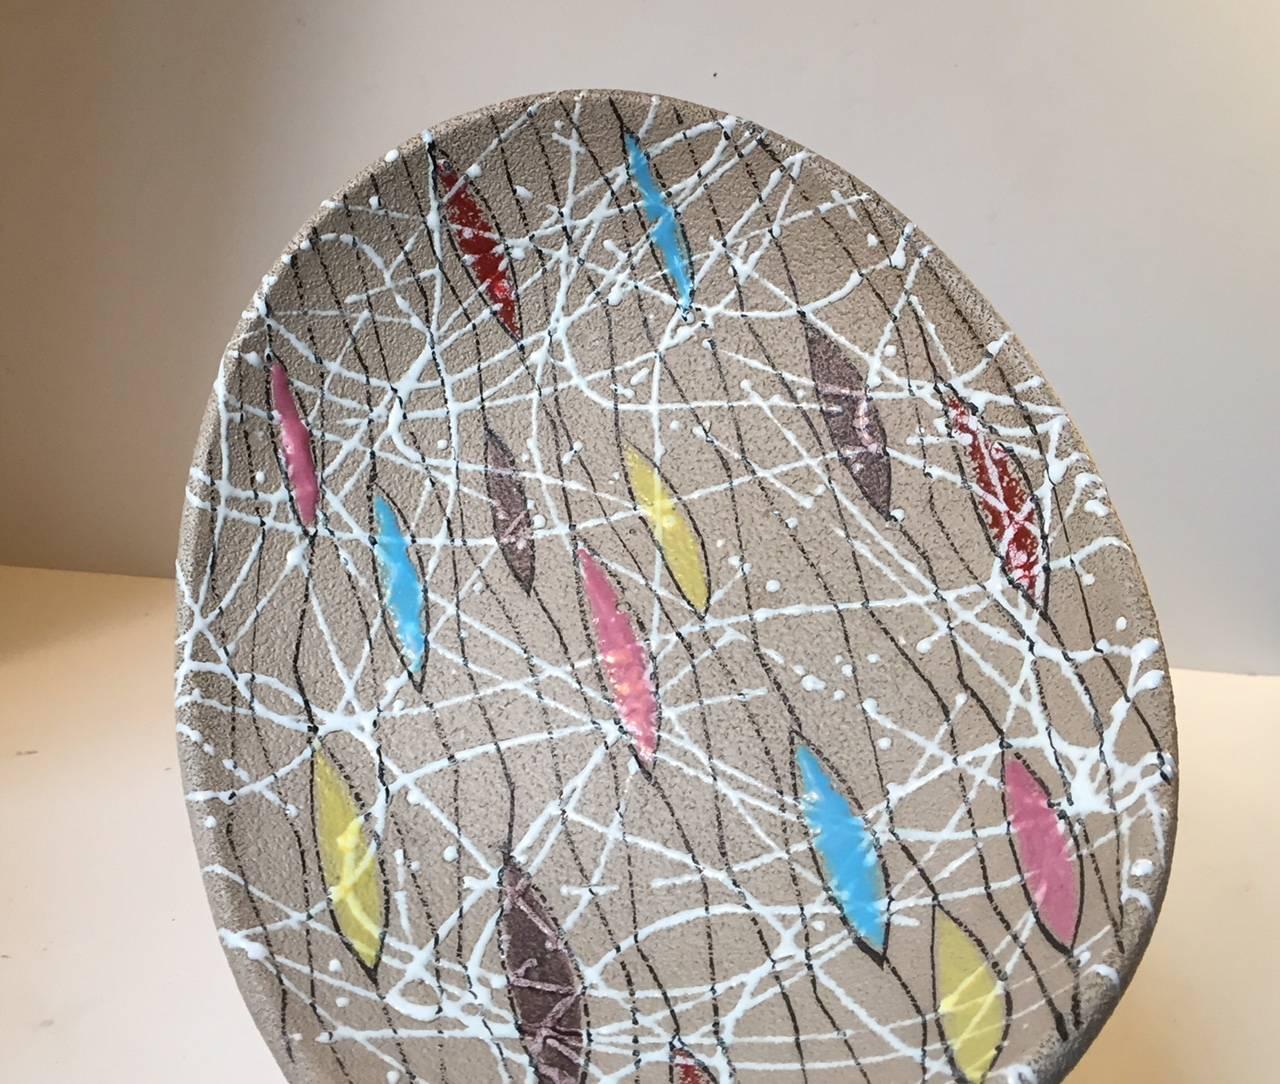 - Modernist Italian ceramic bowl made by Fratelli Fanciullacci with sgrafitto and multicolored leaves
- Surface partly rough, partly glazed in bright colors
- No damages
-Manufactured by Bitossi during the 1950s.